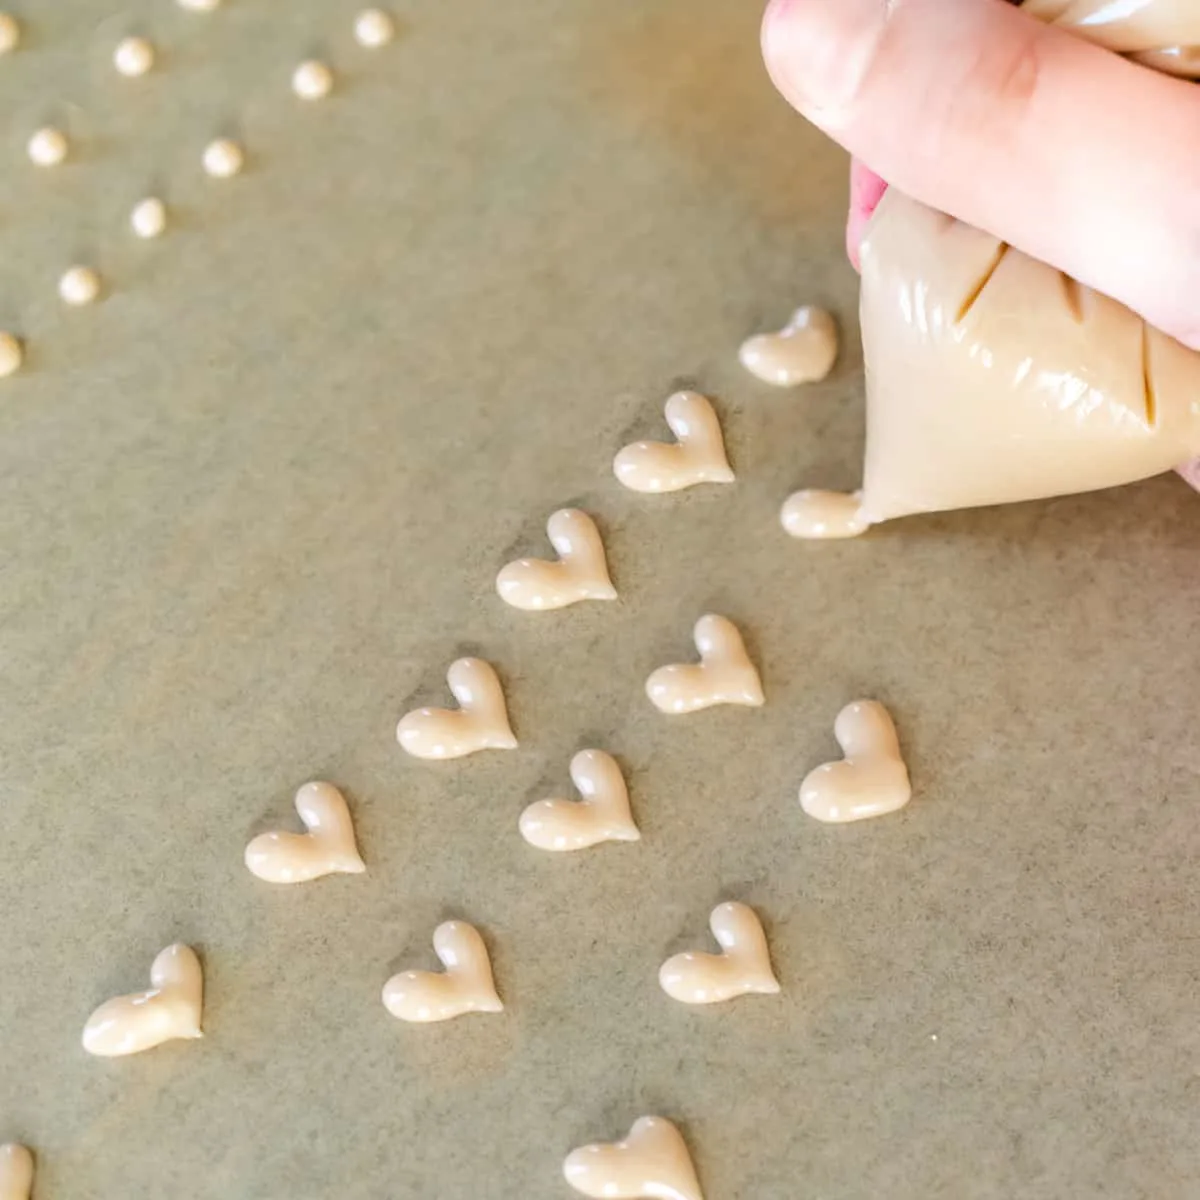 Piping heart shapes and dots onto brown parchment paper with pink sugar mixture.